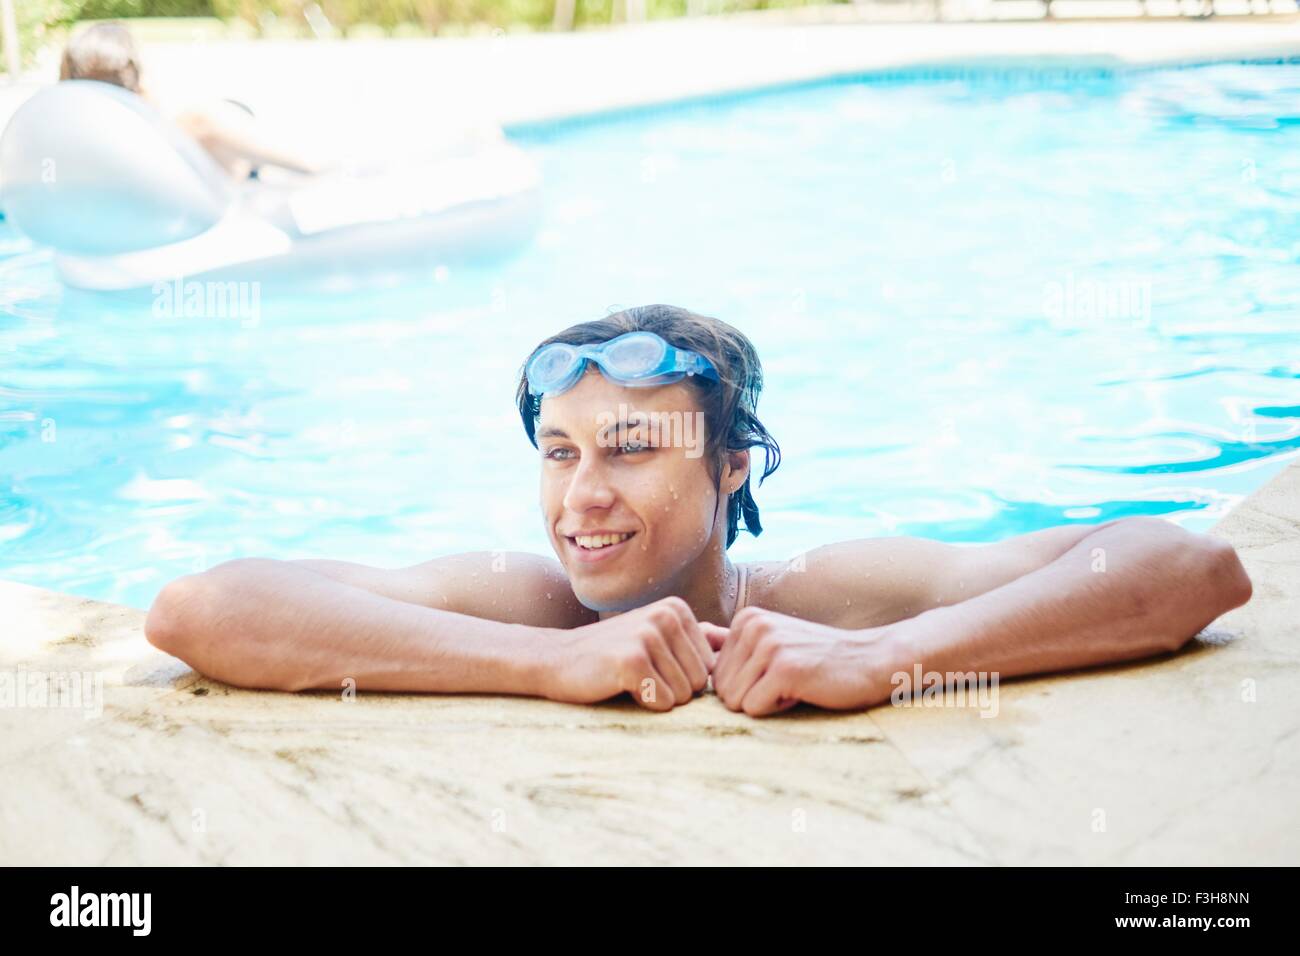 Portrait of smiling young man with wet hair in swimming pool Stock Photo